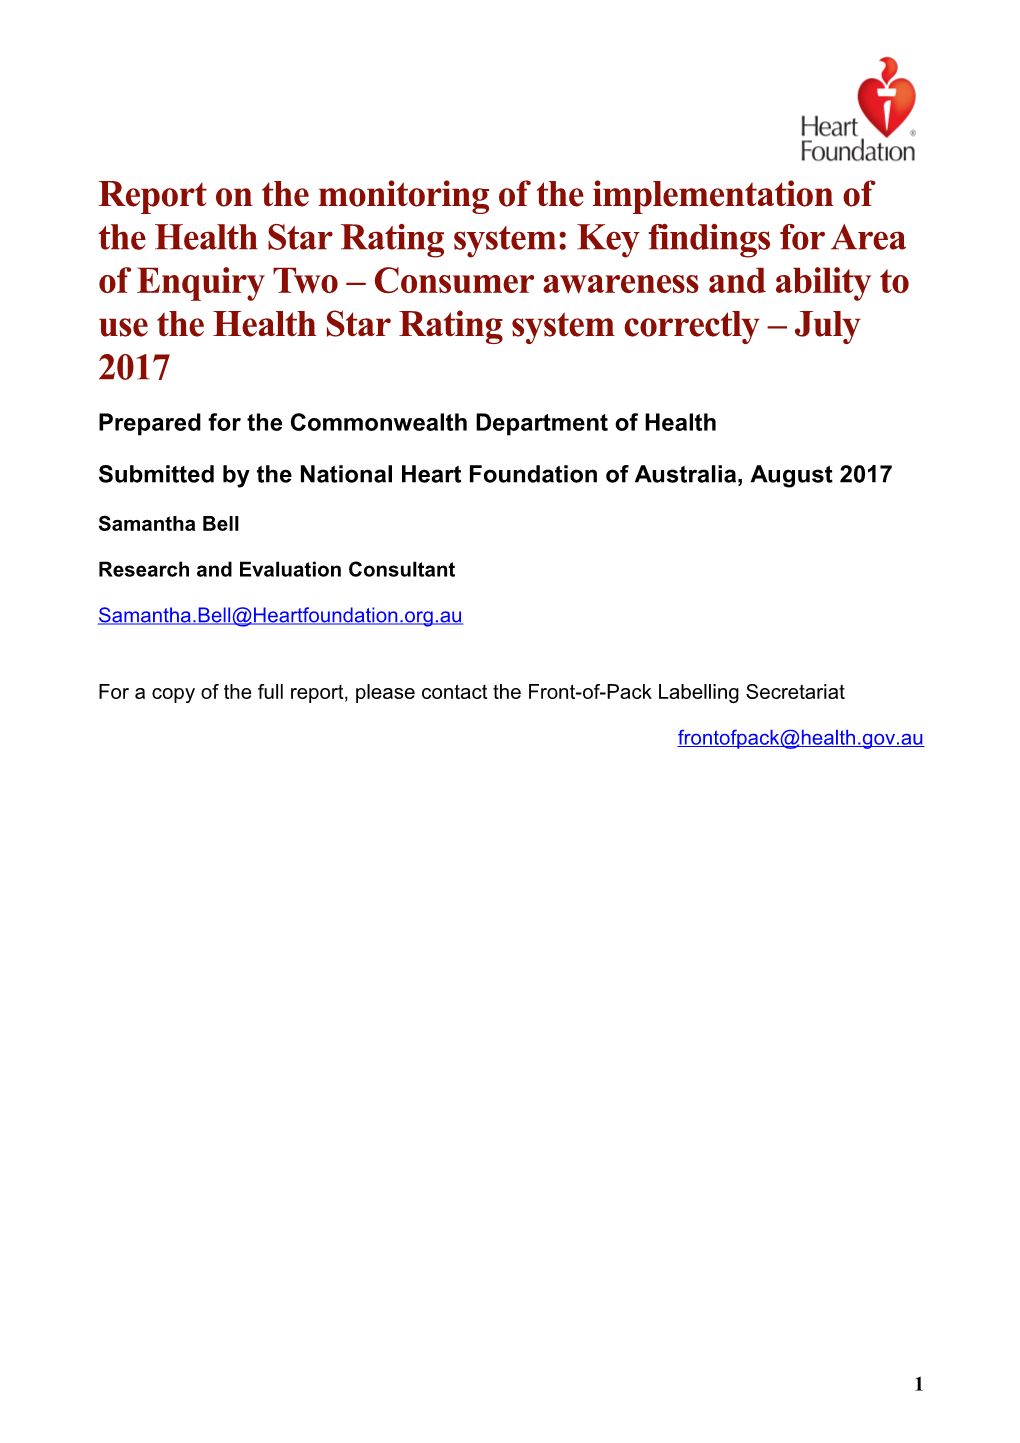 Report on the Monitoring of the Implementation of the Health Star Rating System: Key Findings